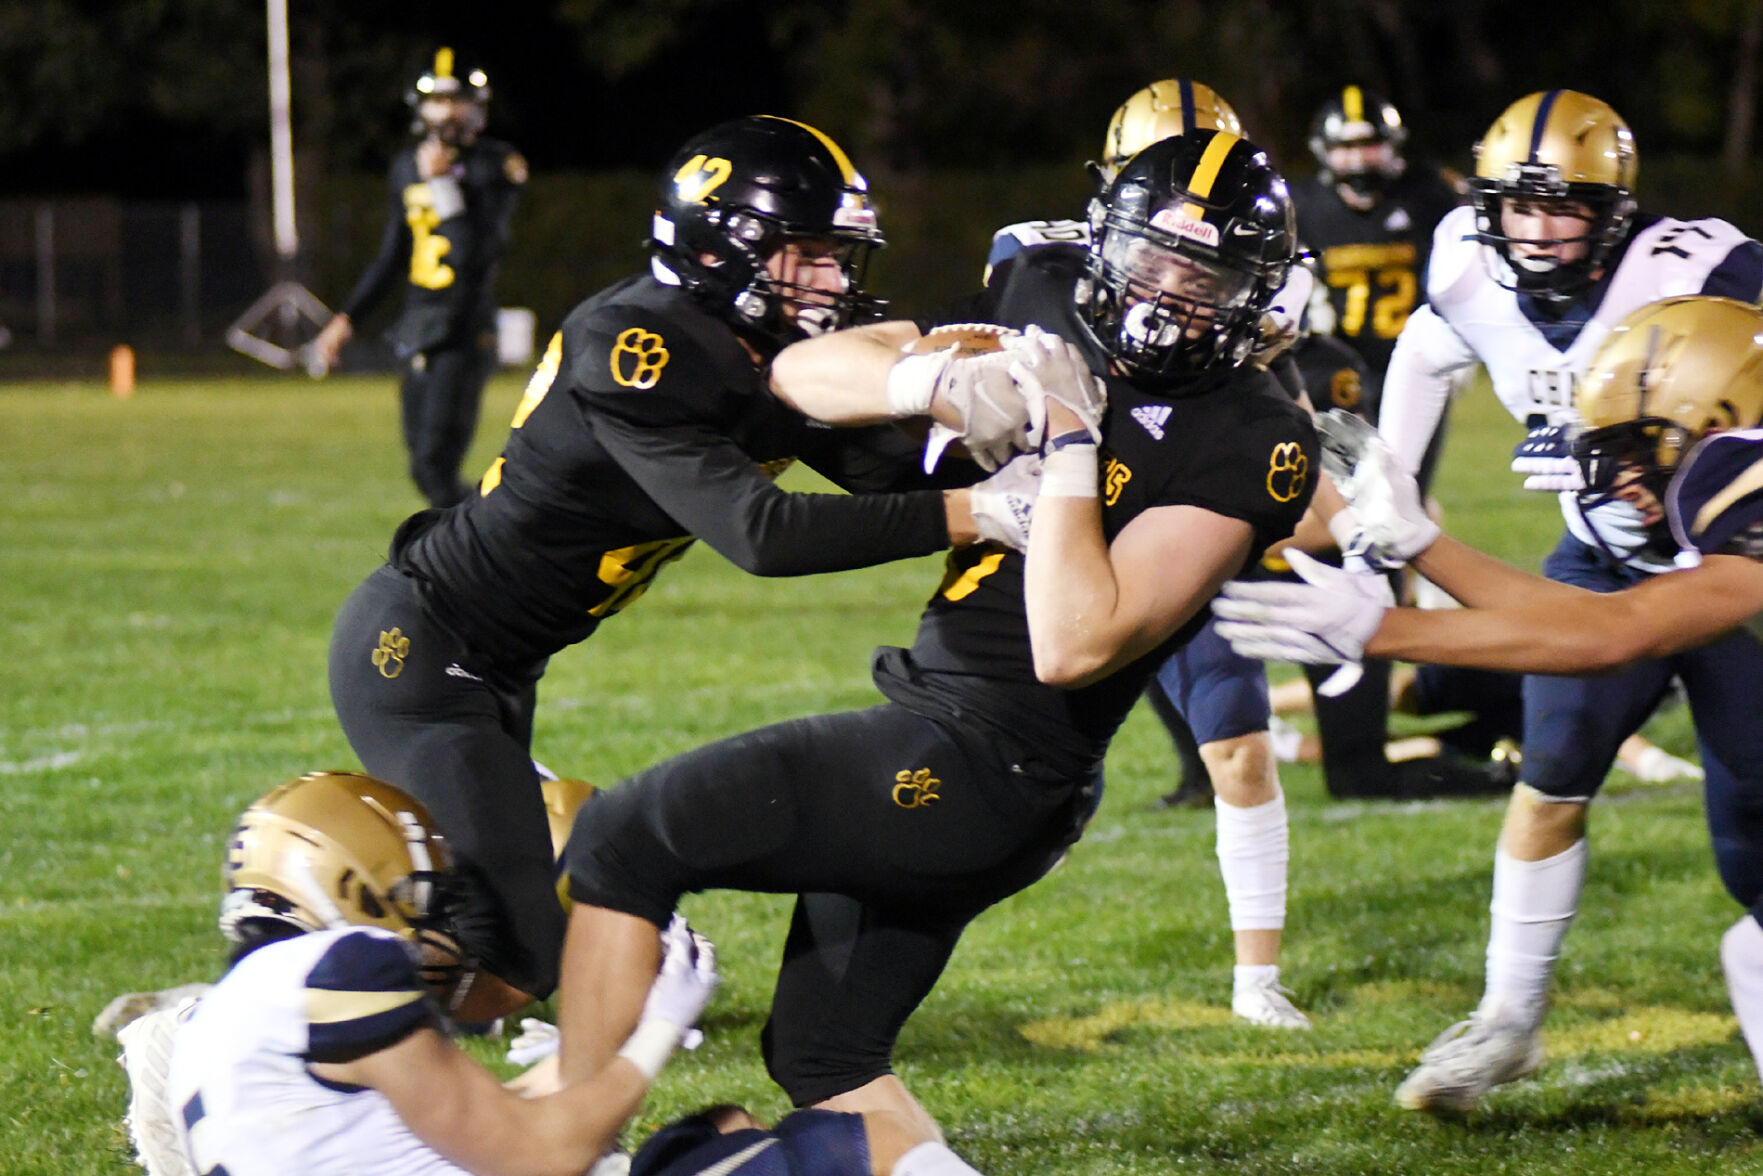 Mankato East suffer 36-22 defeat against Chanhassen in high school football game